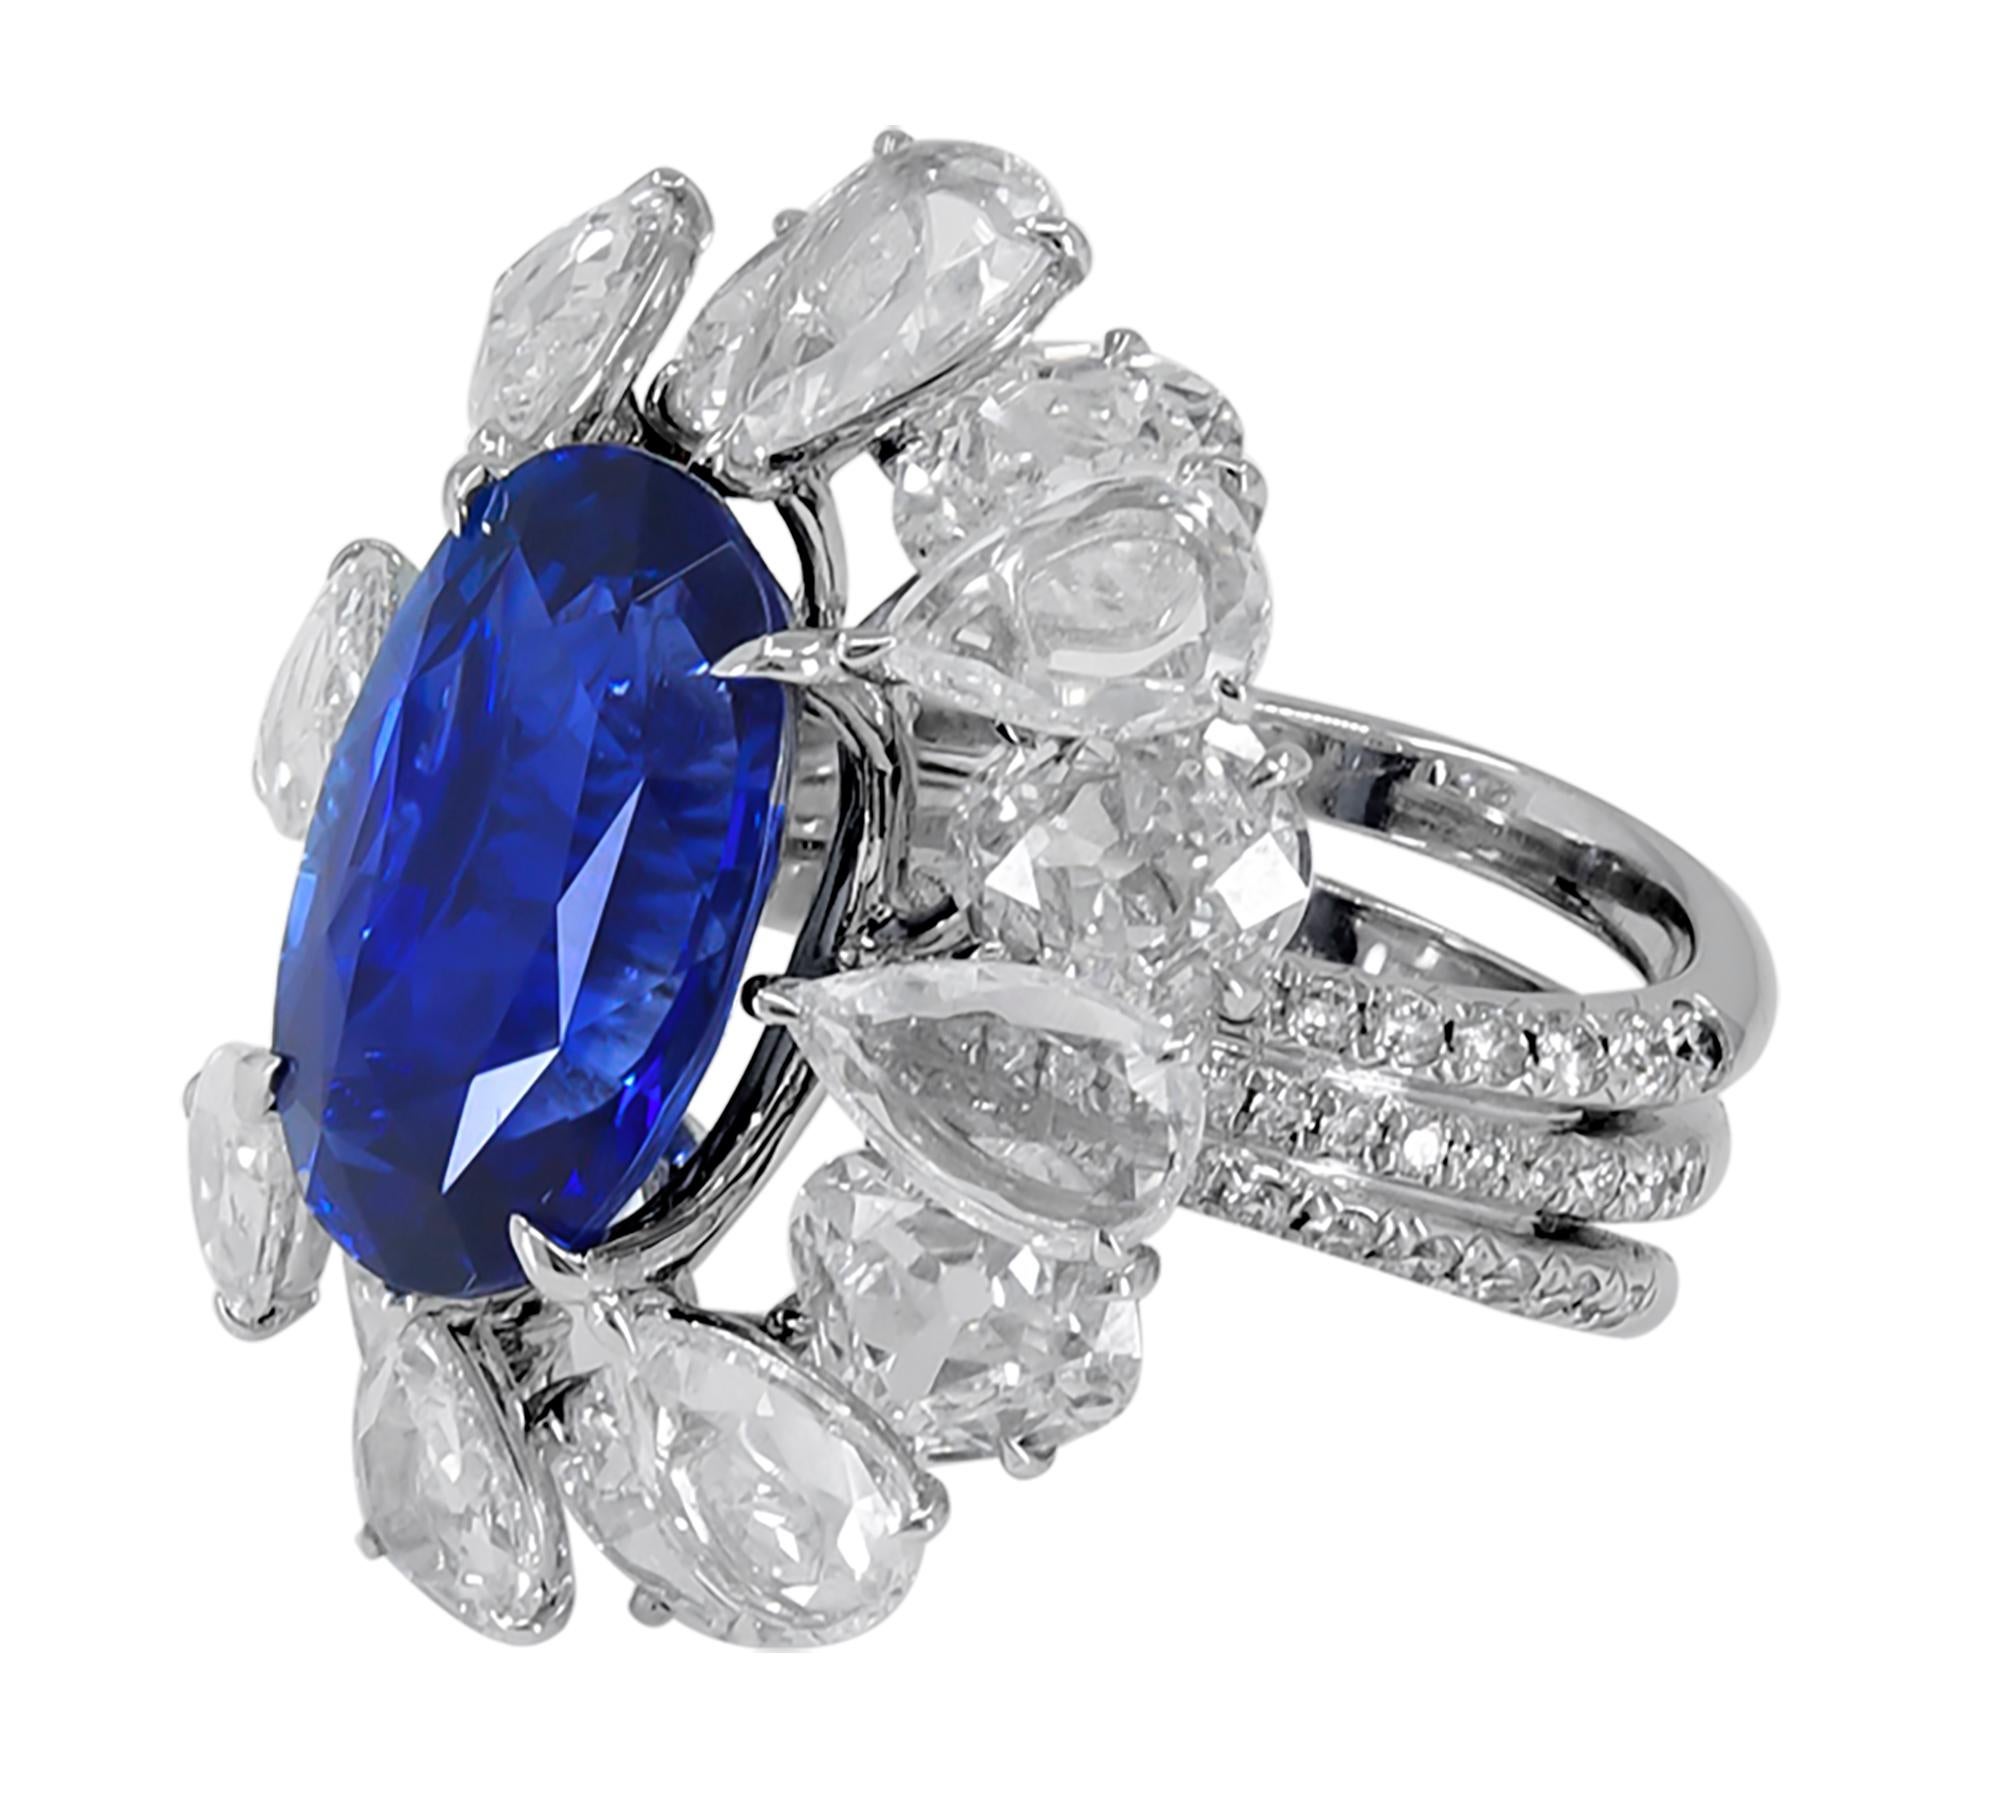 A beautiful ring featuring a 9.01 carat oval step cut blue sapphire with a halo encrusted with round and pear shape rose cut diamonds weighing total 8.43 carats. The ring is accompanied by a SSEF lab report stating that the sapphire is of Ceylon